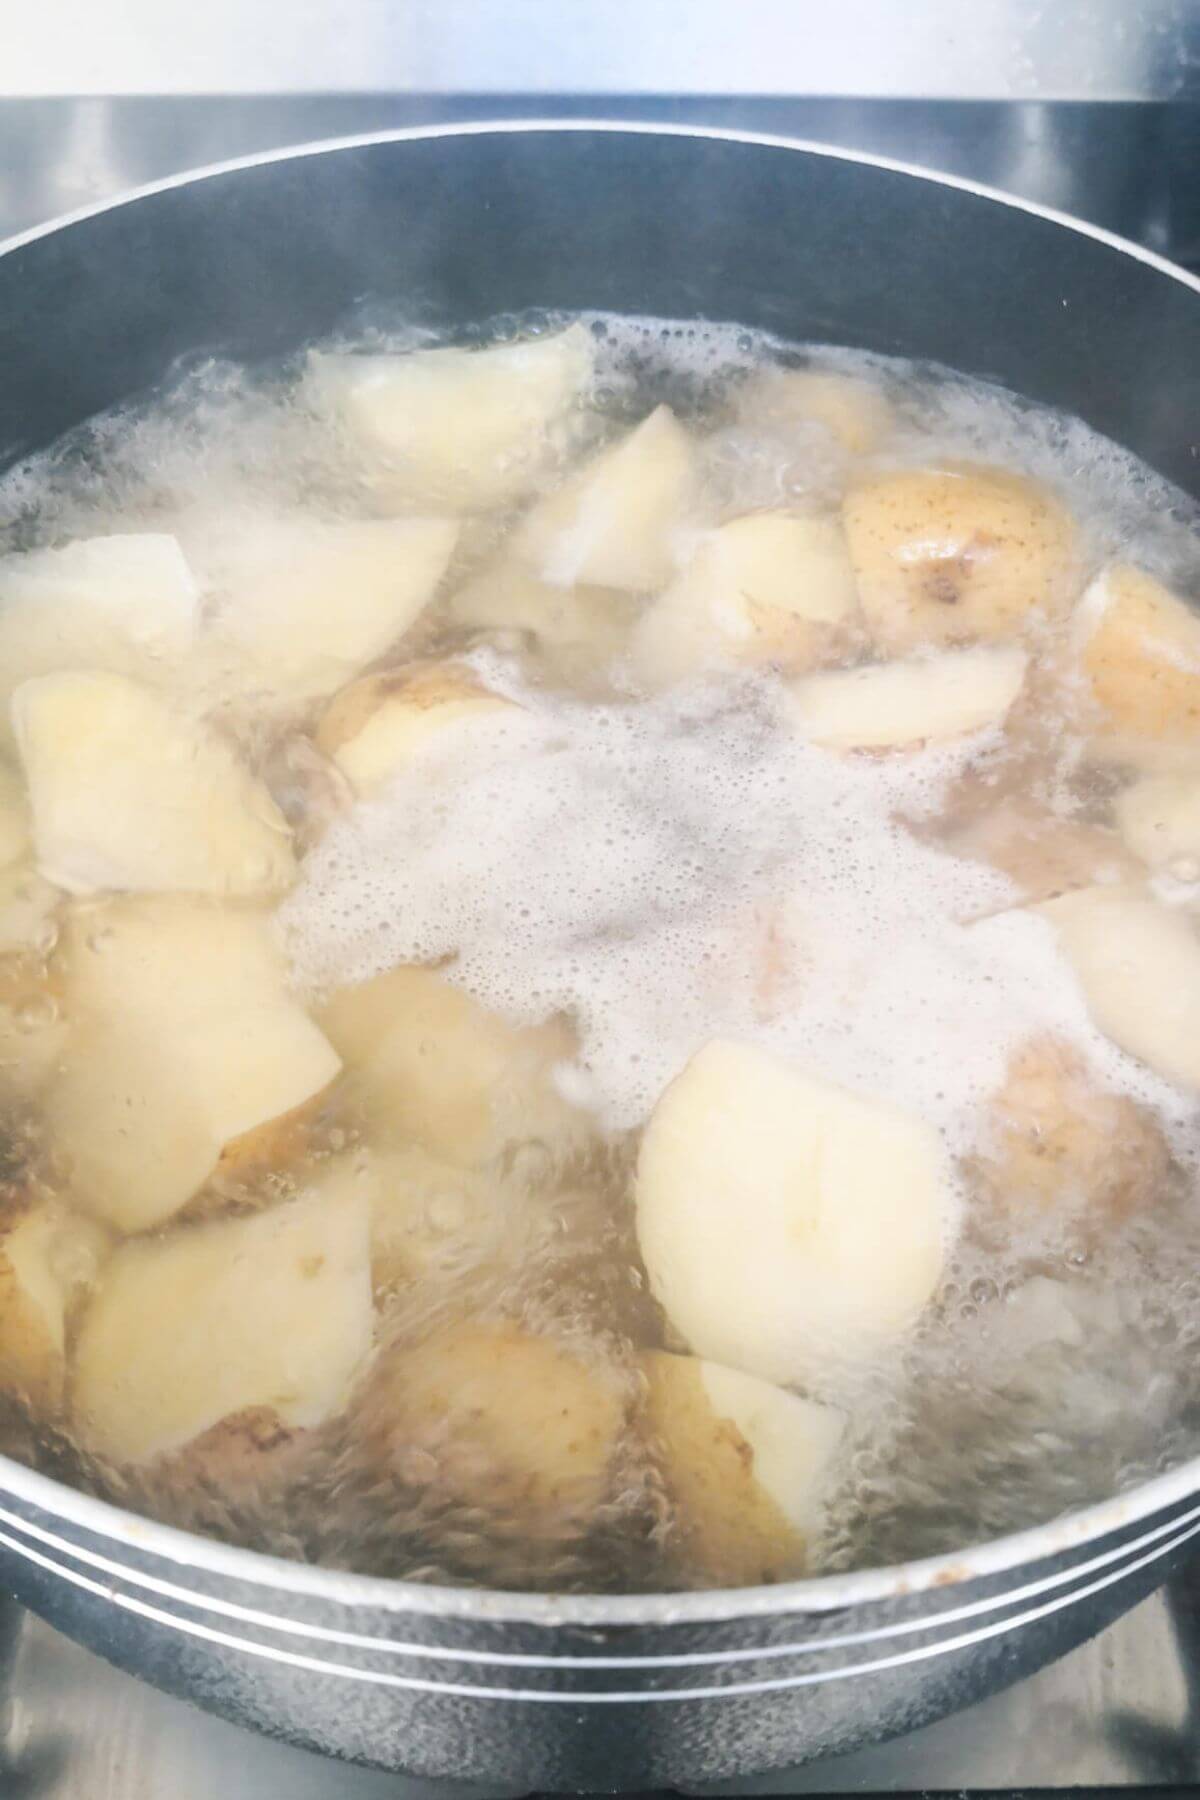 Chopped potatoes boiling in a large pot full of water.